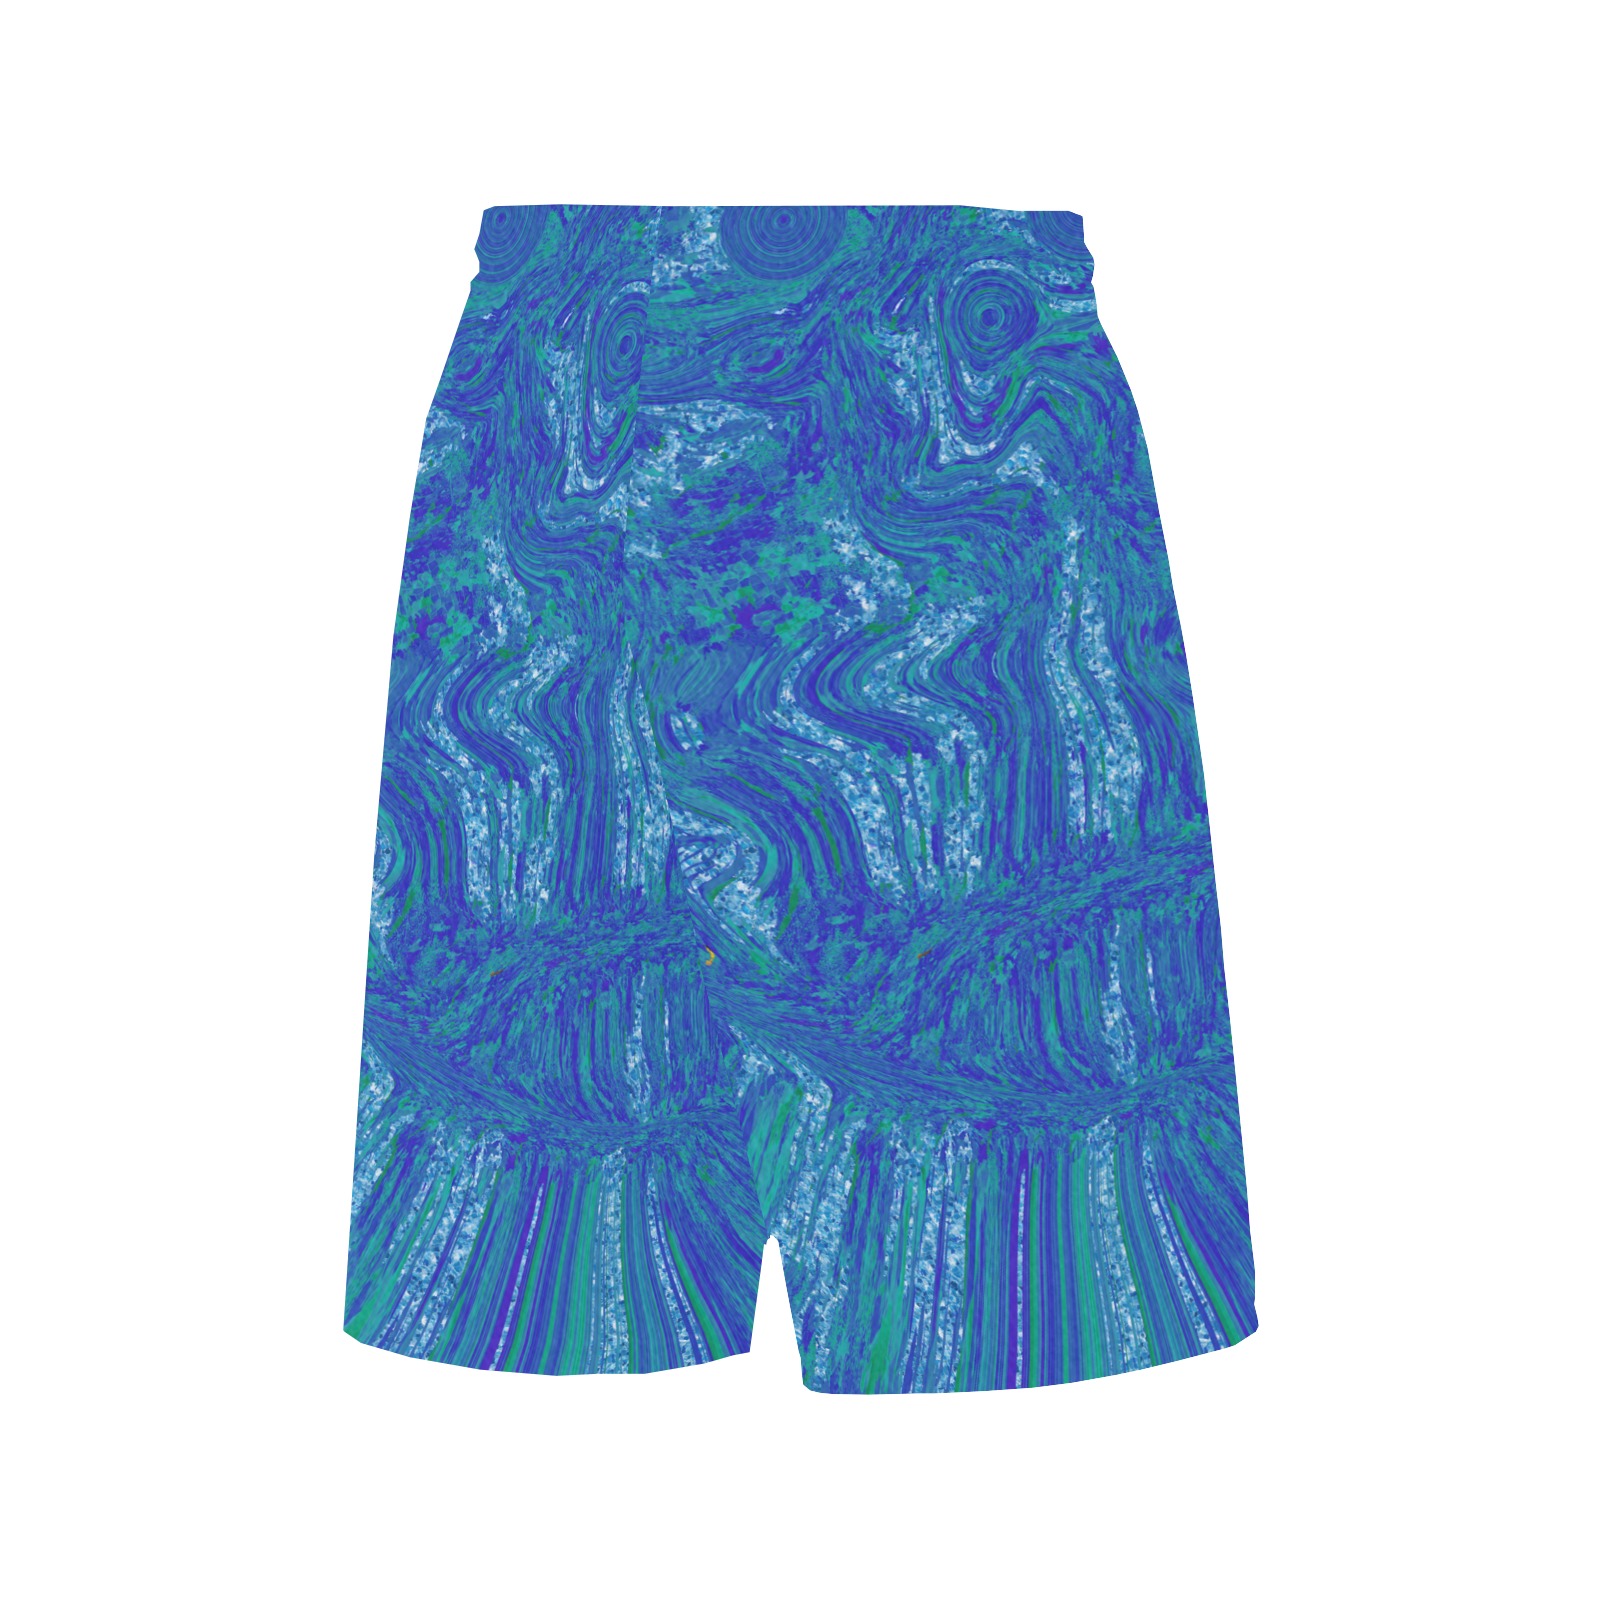 ocean storms All Over Print Basketball Shorts